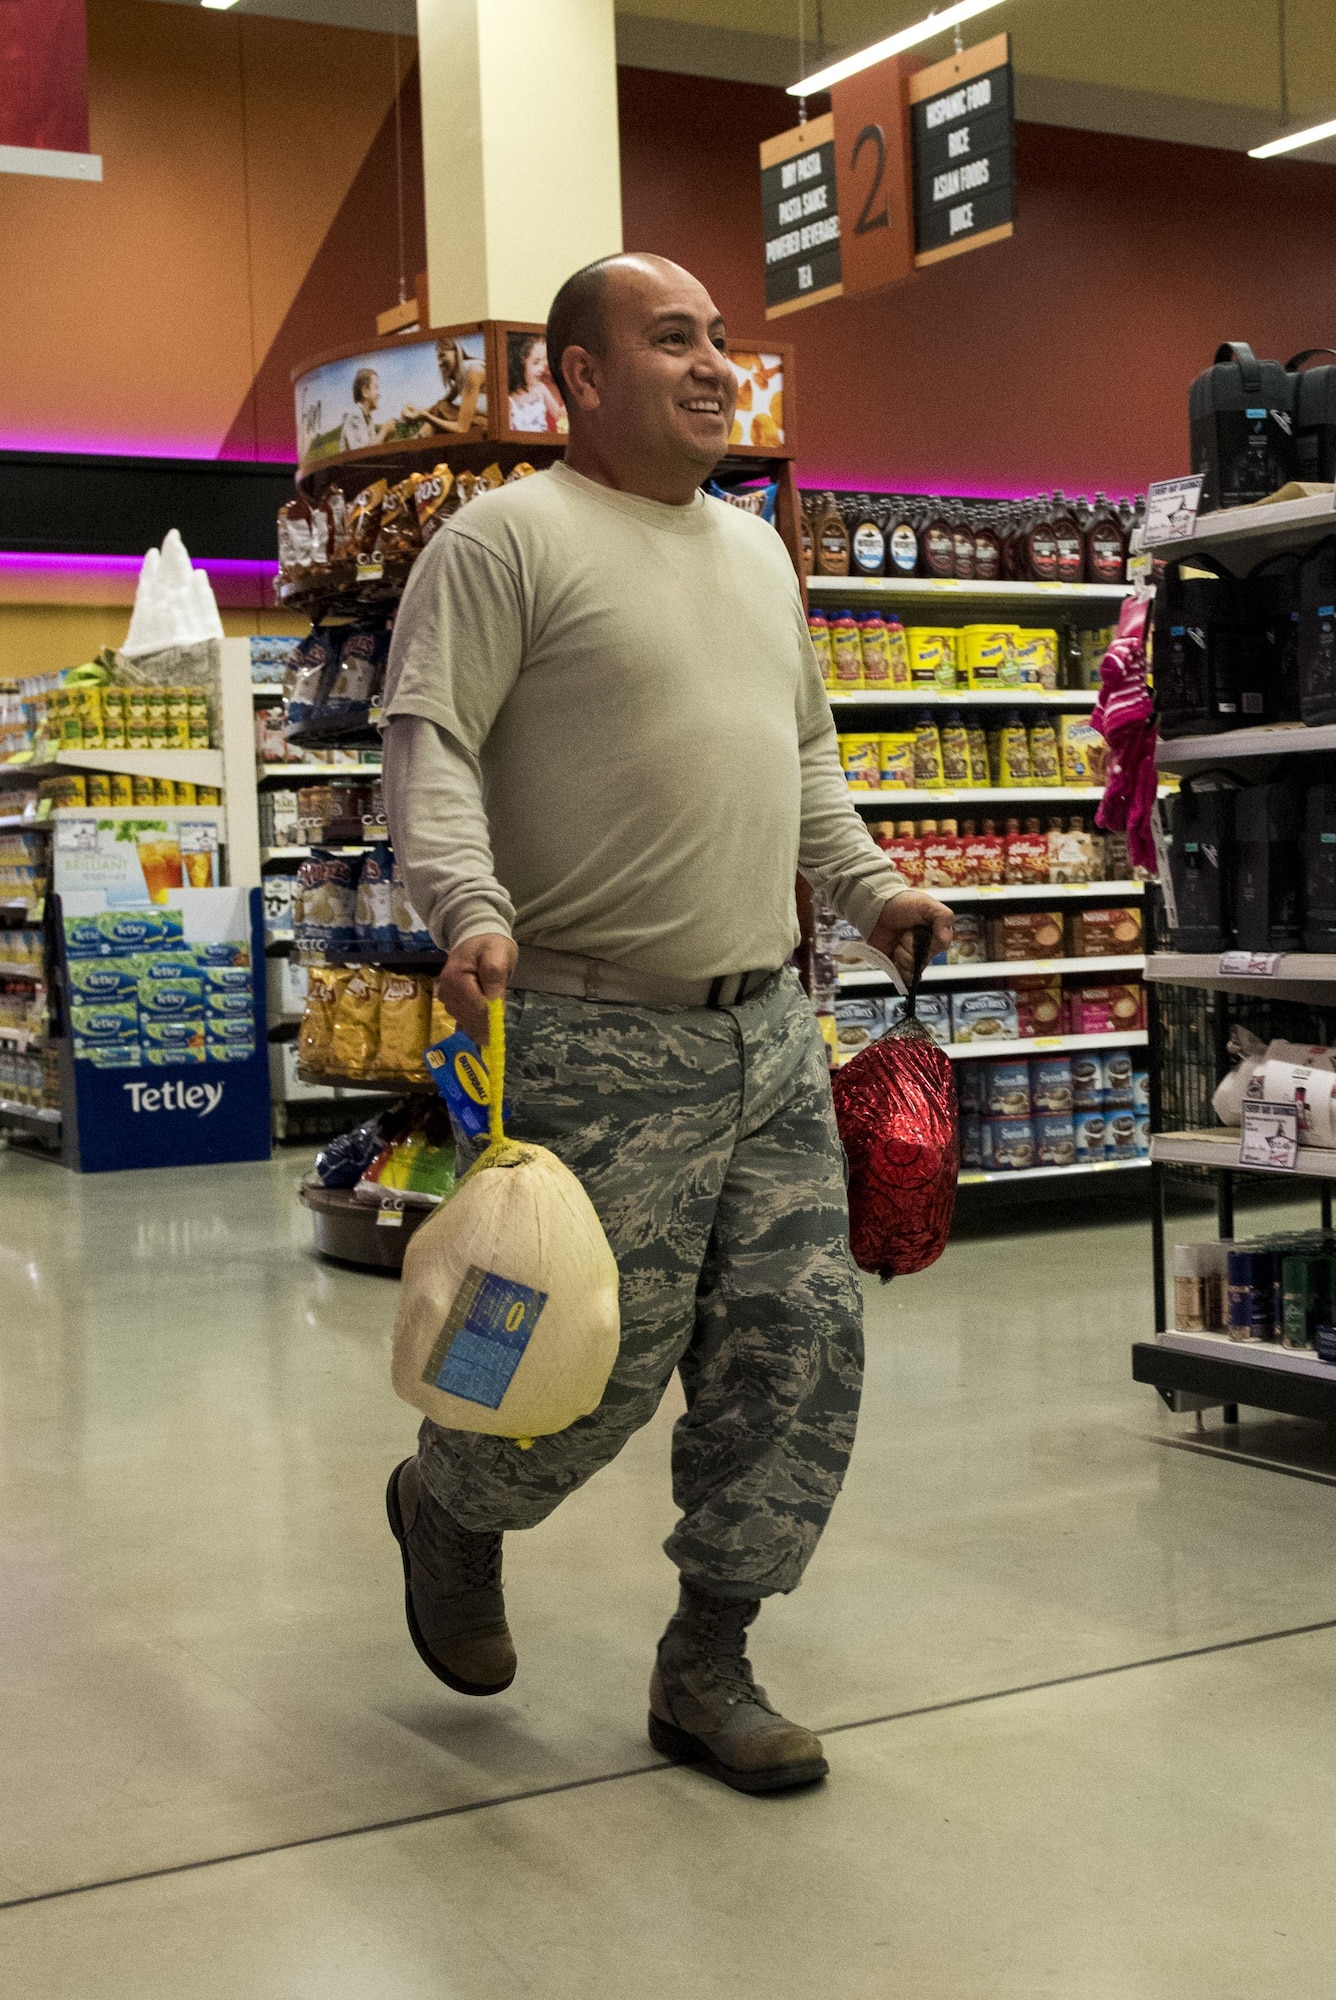 U.S. Air Force Staff Sgt. David Gomez, 52nd Force Support Squadron training manager, races down an aisle during the Spangdahlem Spouses and Enlisted Members Club Commissary Sweep at Spangdahlem Air Base, Germany, Nov. 15, 2016. The event gave participants the opportunity to receive free groceries and Commissary gift cards ranging from $50 to $200. (U.S. Air Force photo by Airman 1st Class Preston Cherry)